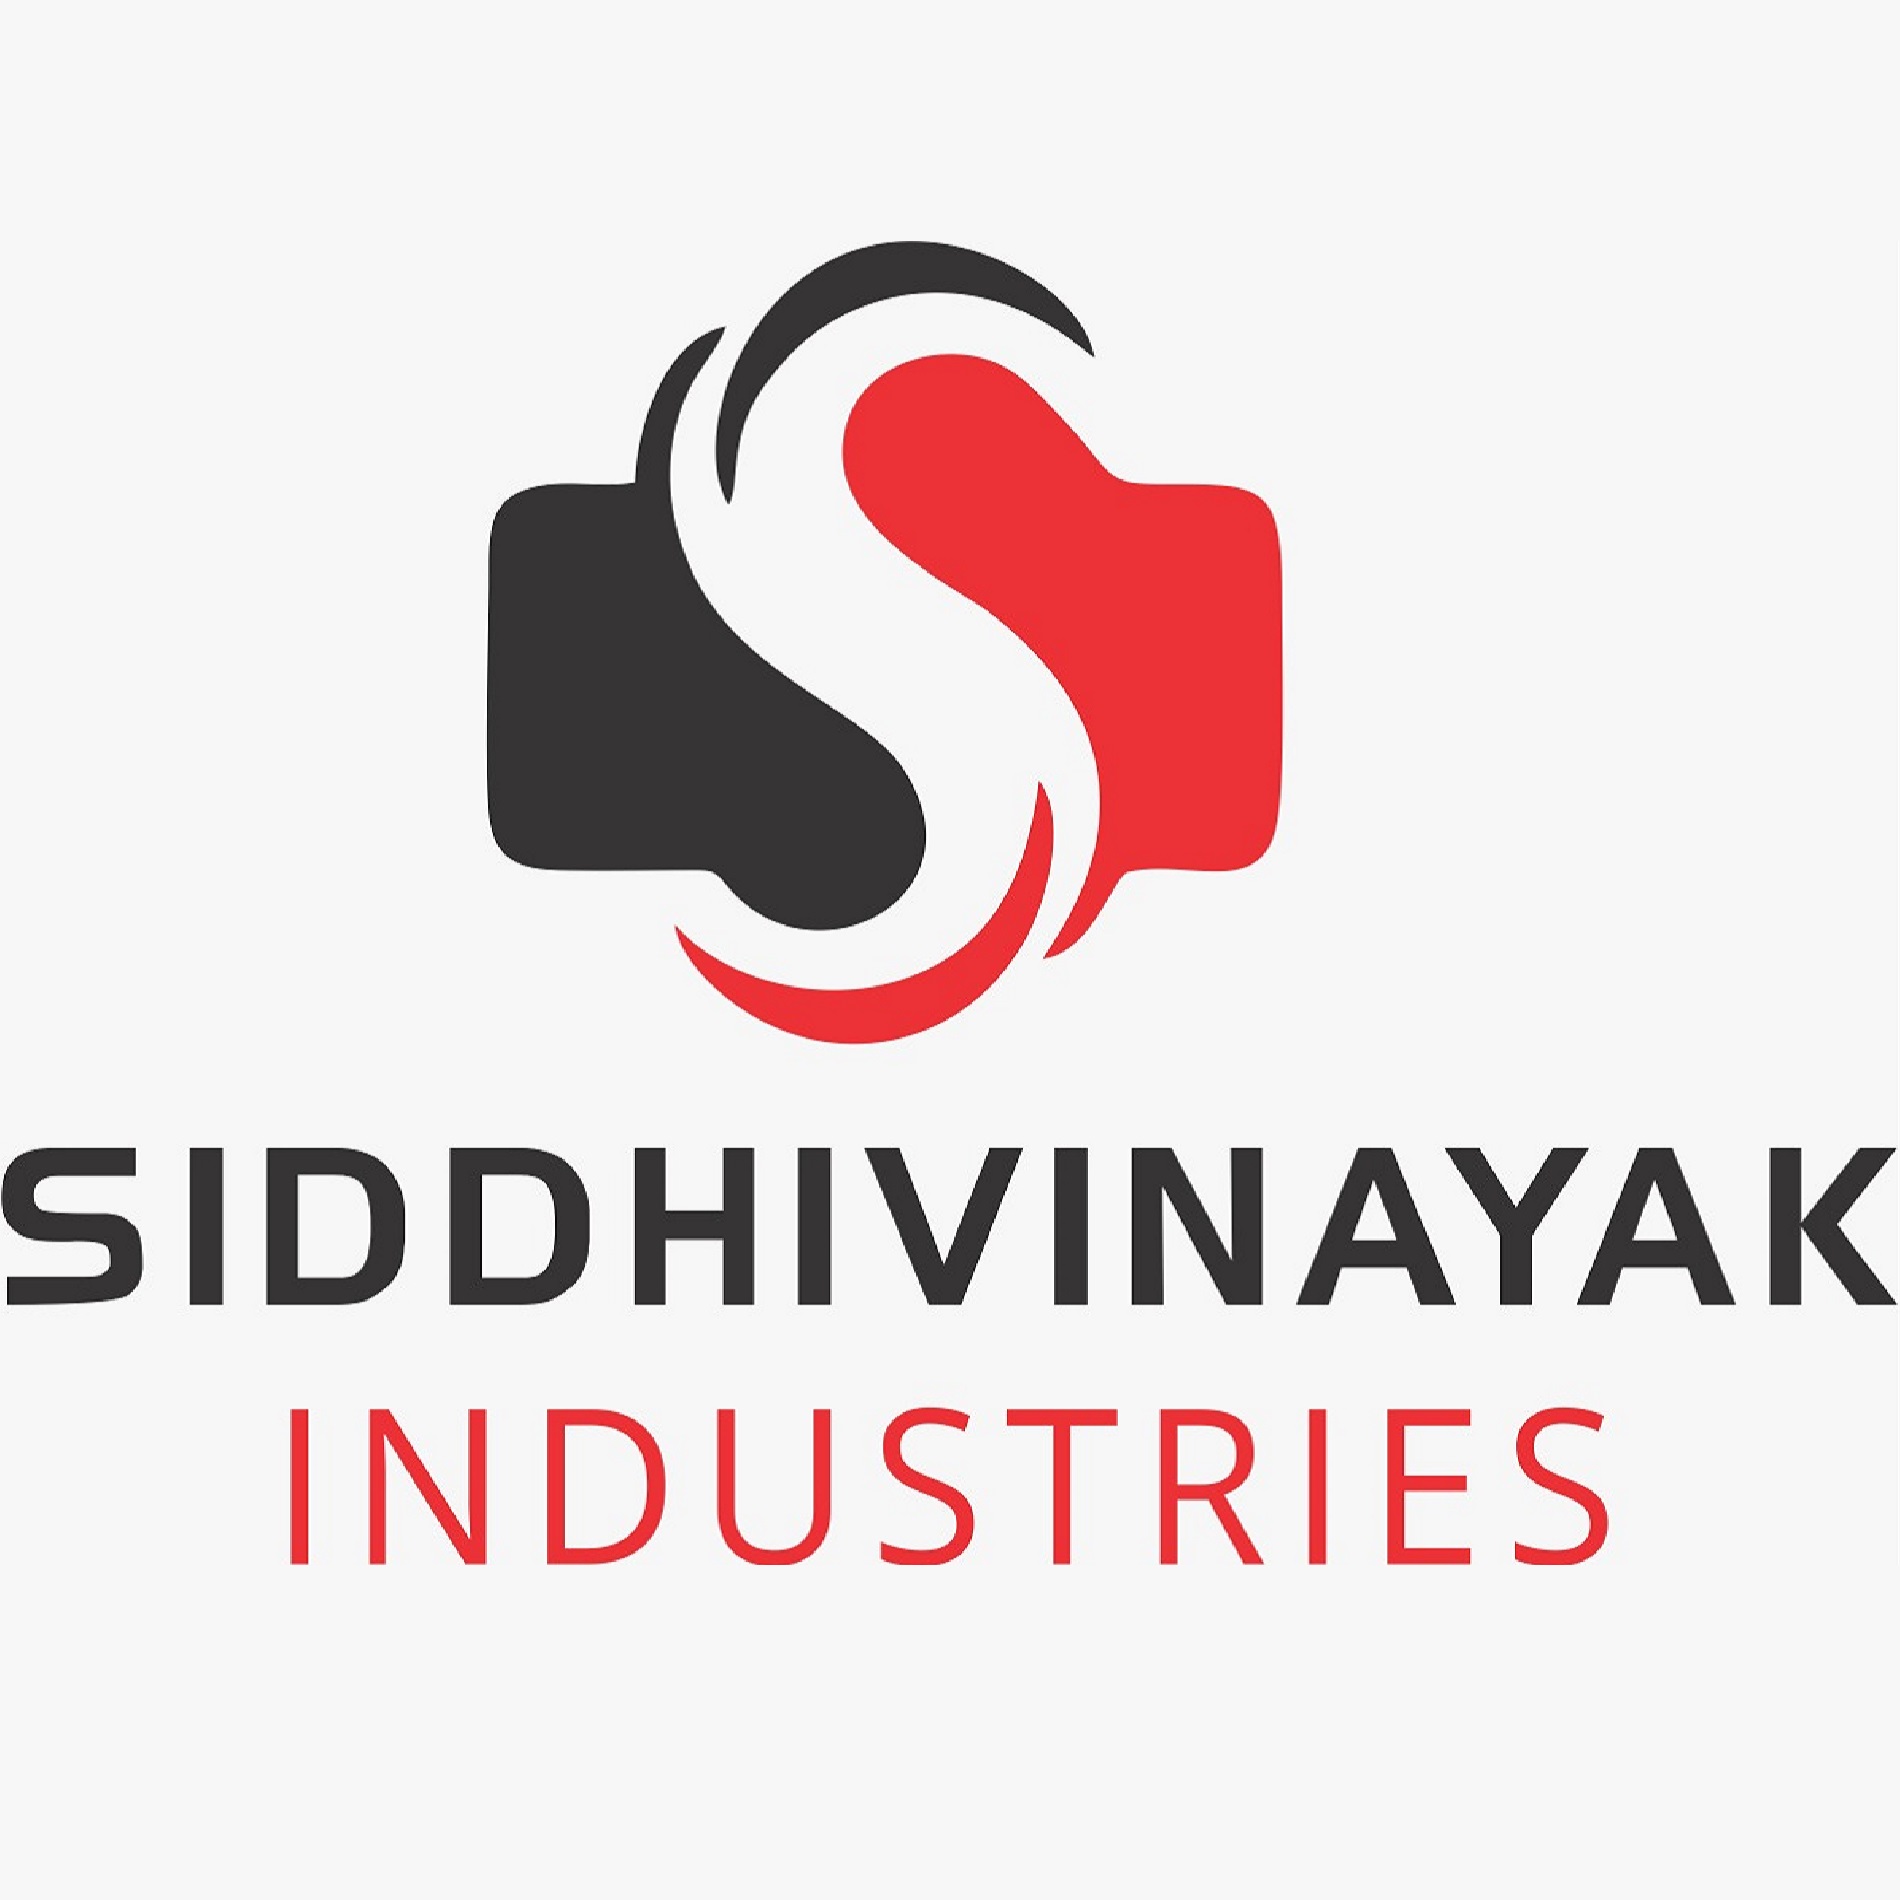 Siddhivinayak Industries|Machinery manufacturers|Industrial Services